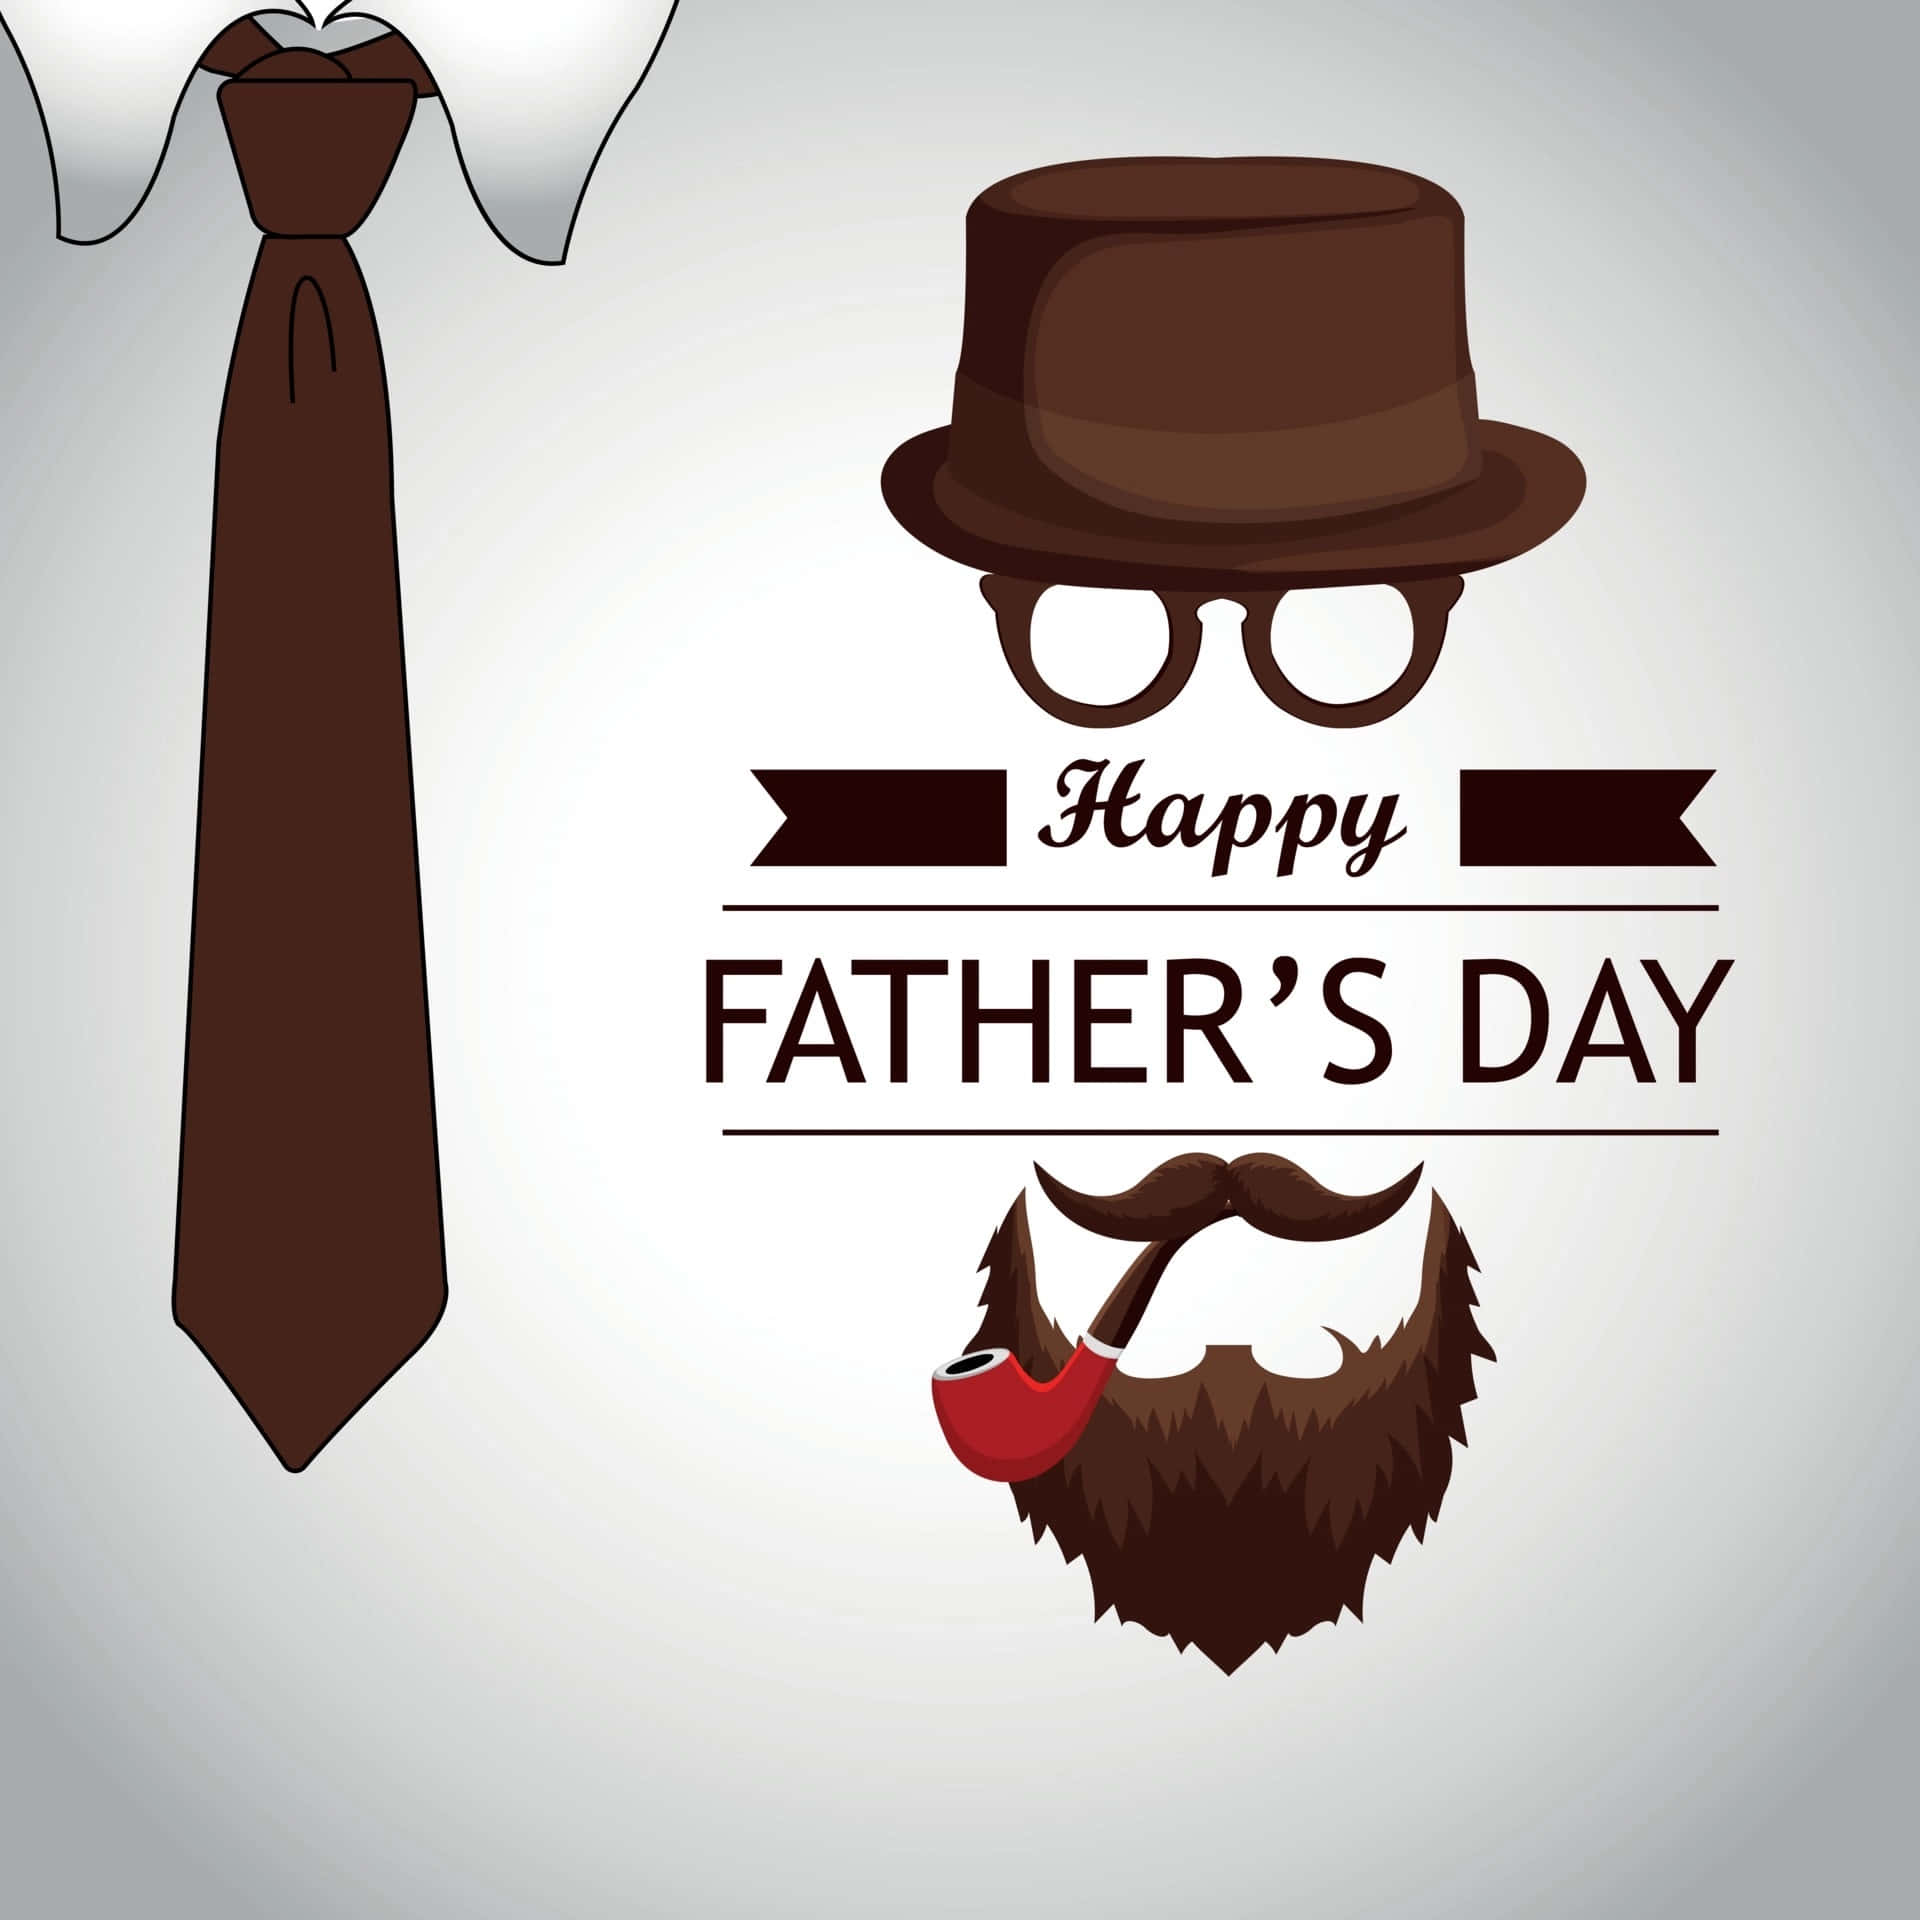 It's Fathers Day - Celebrate Special Dad in your Life